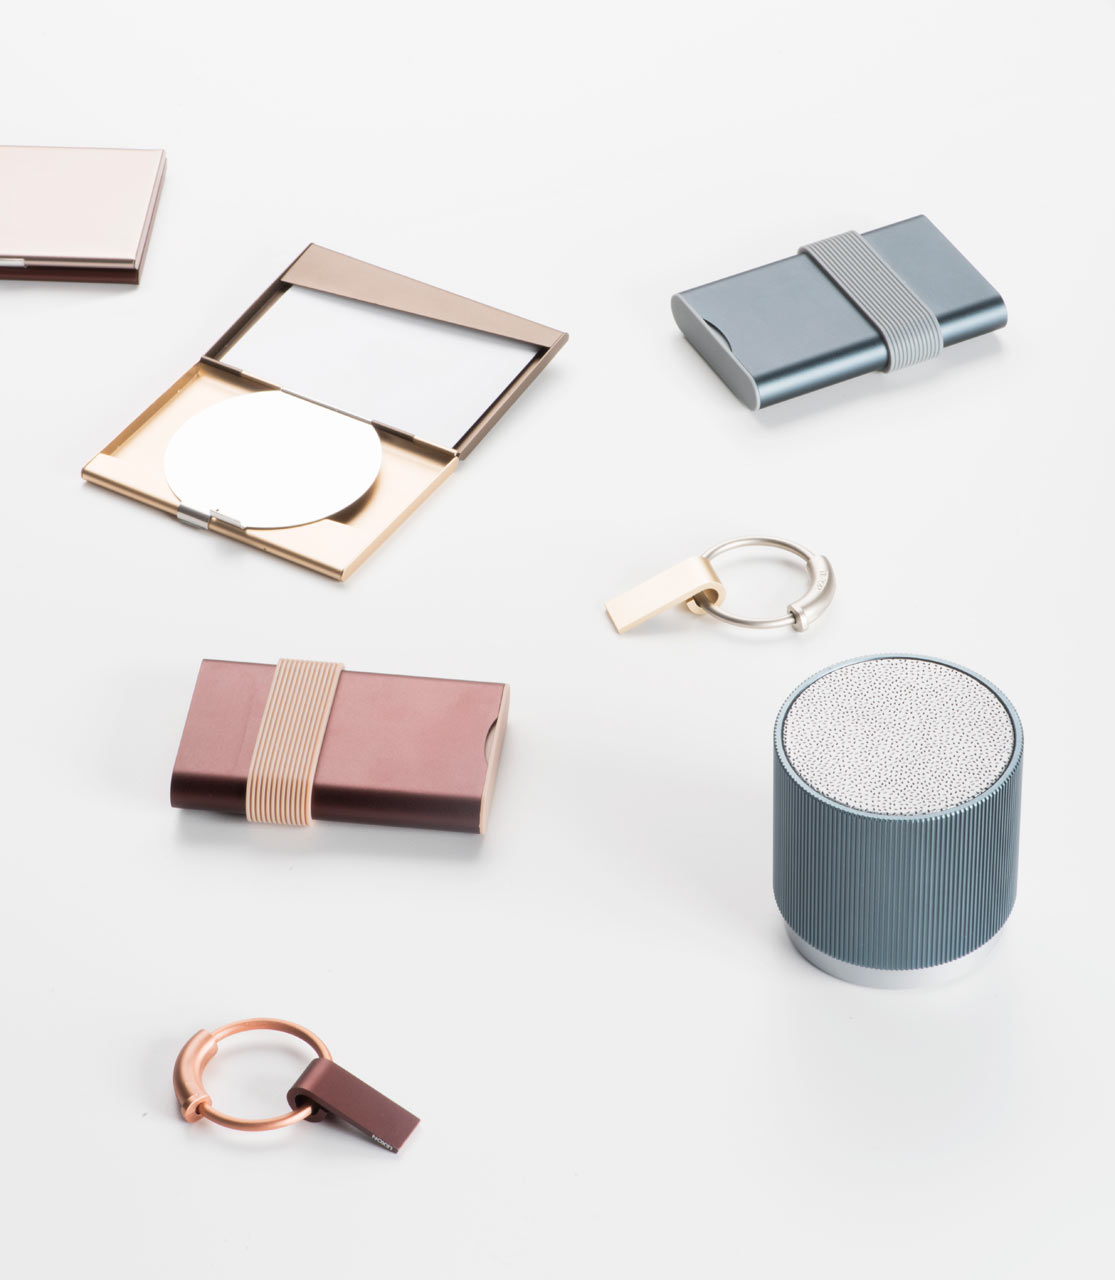 A Collection of Mobile Devices by Pauline Deltour for Lexon